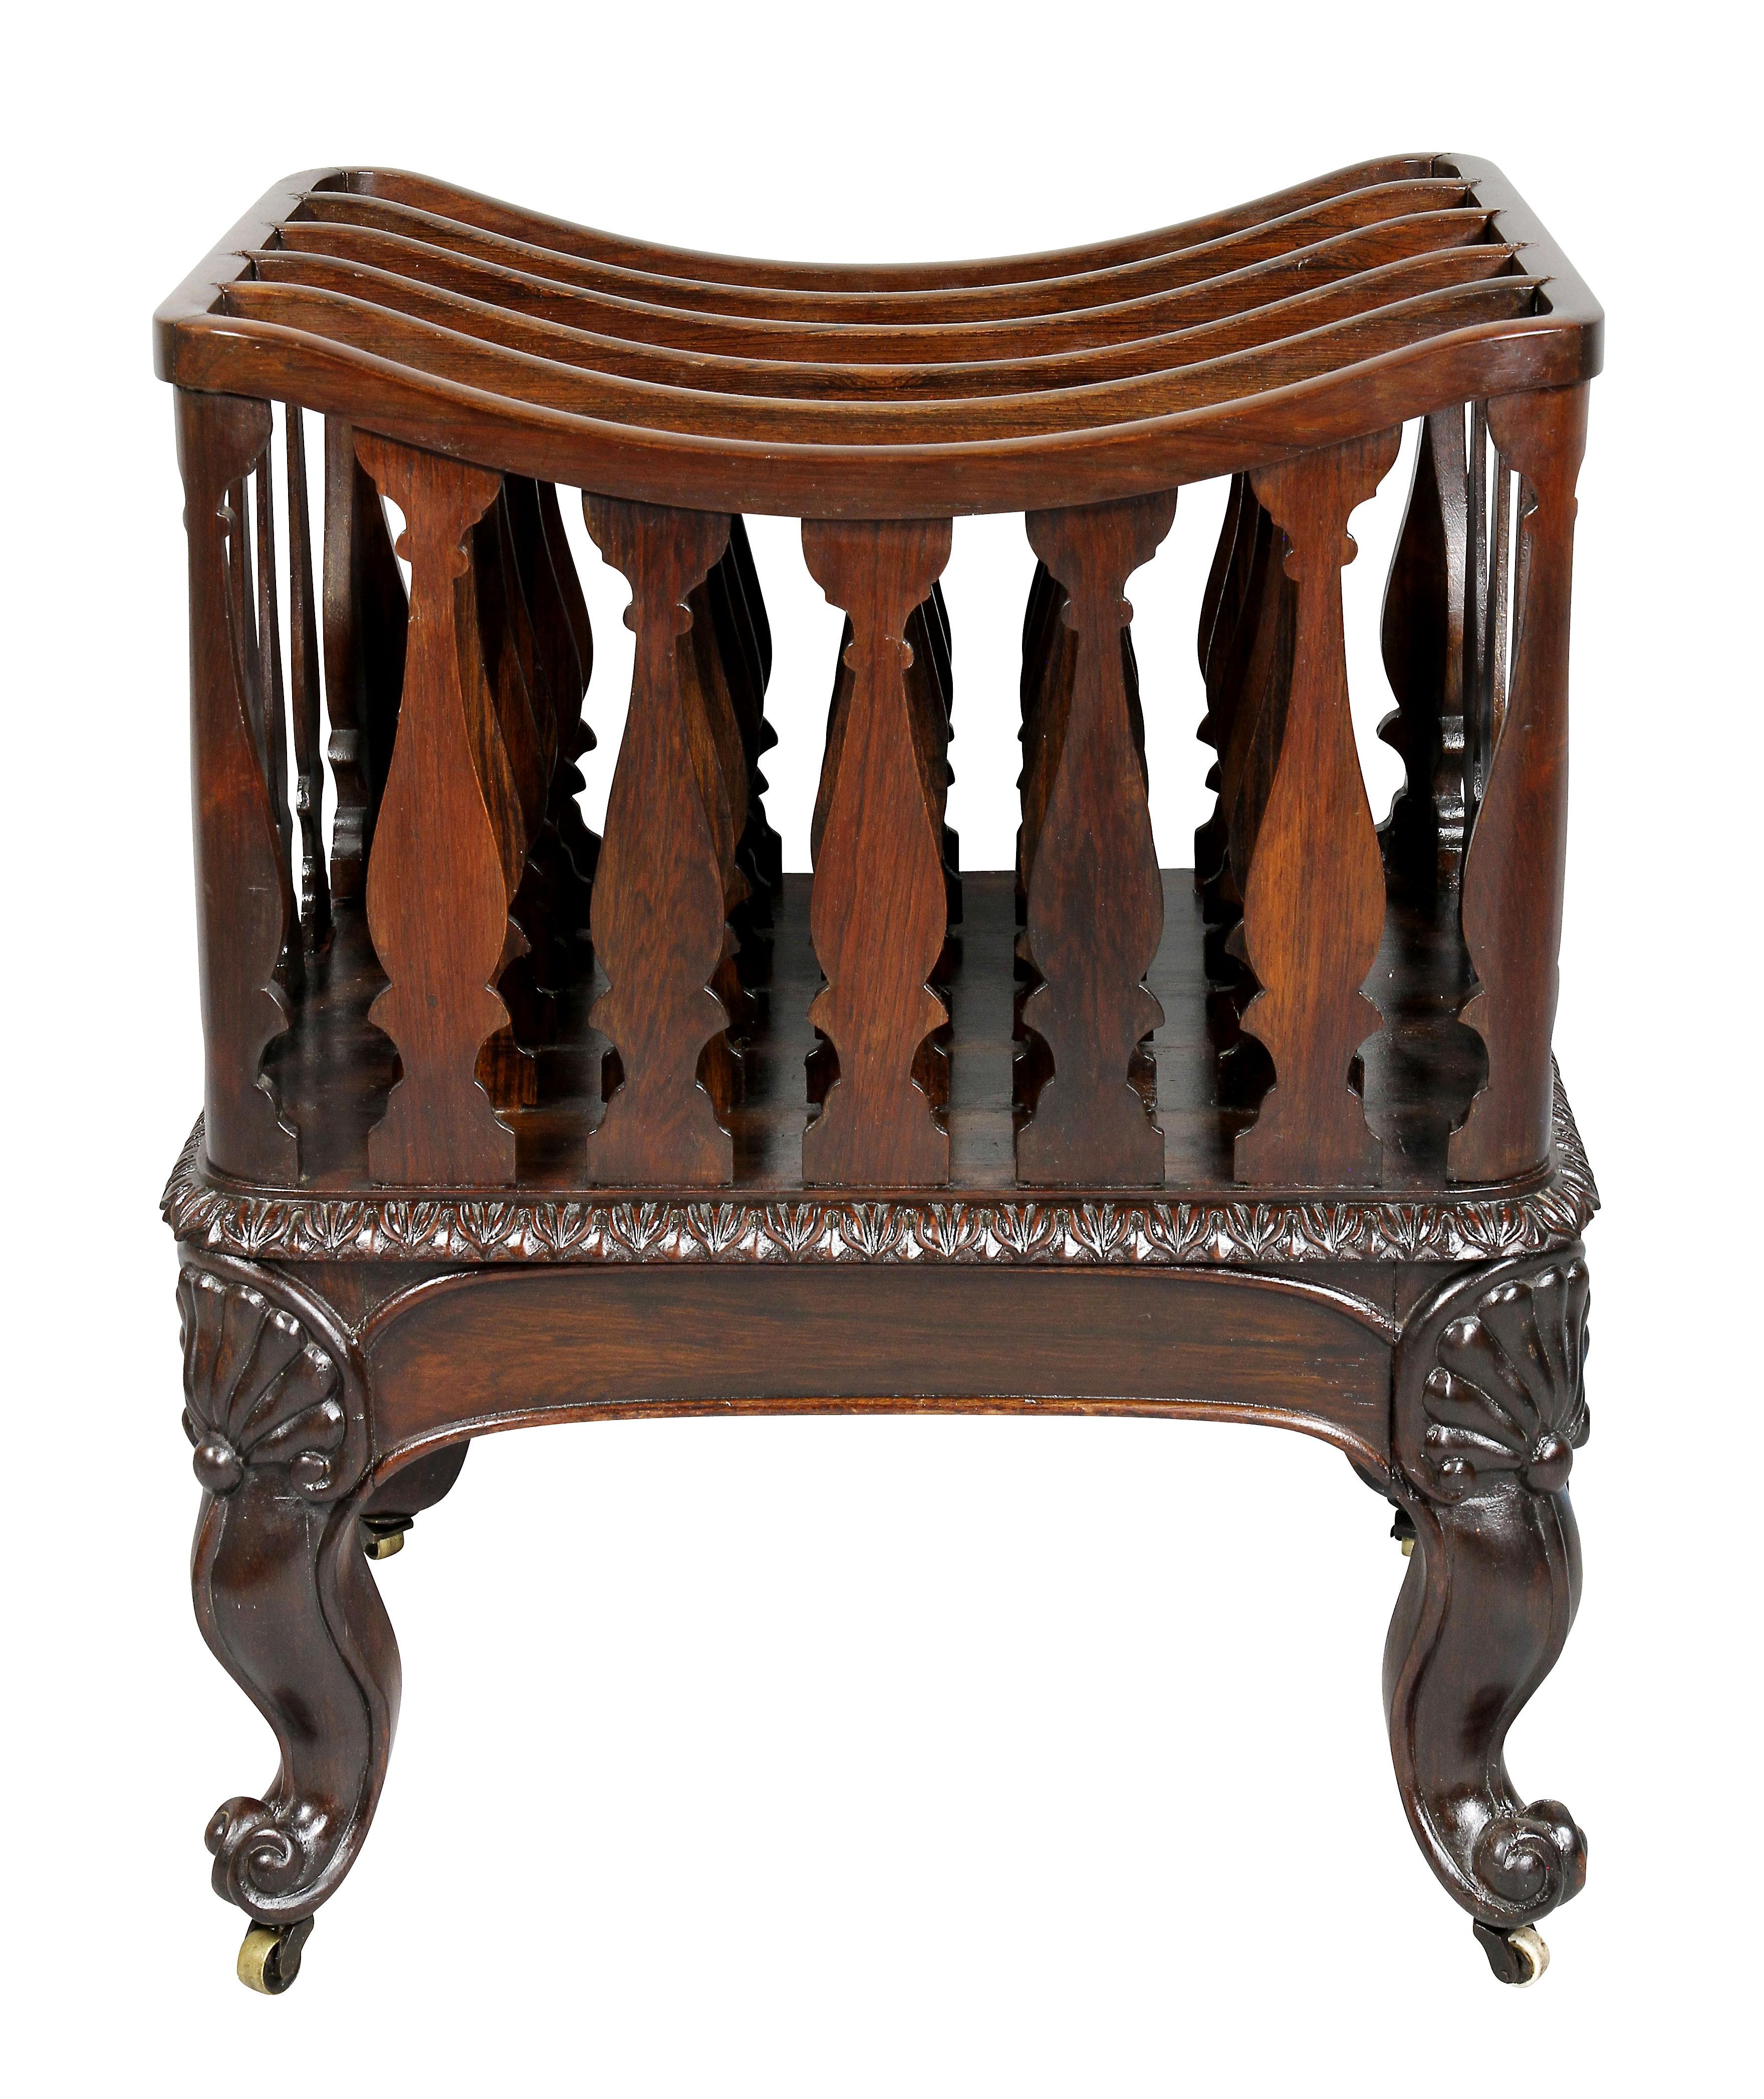 Unusual form in American furniture and probably by Alexander Roux or Joseph Meeks. Typical slatted file section , leaf tip carved frieze raised on cabriole legs with shell carved knees.